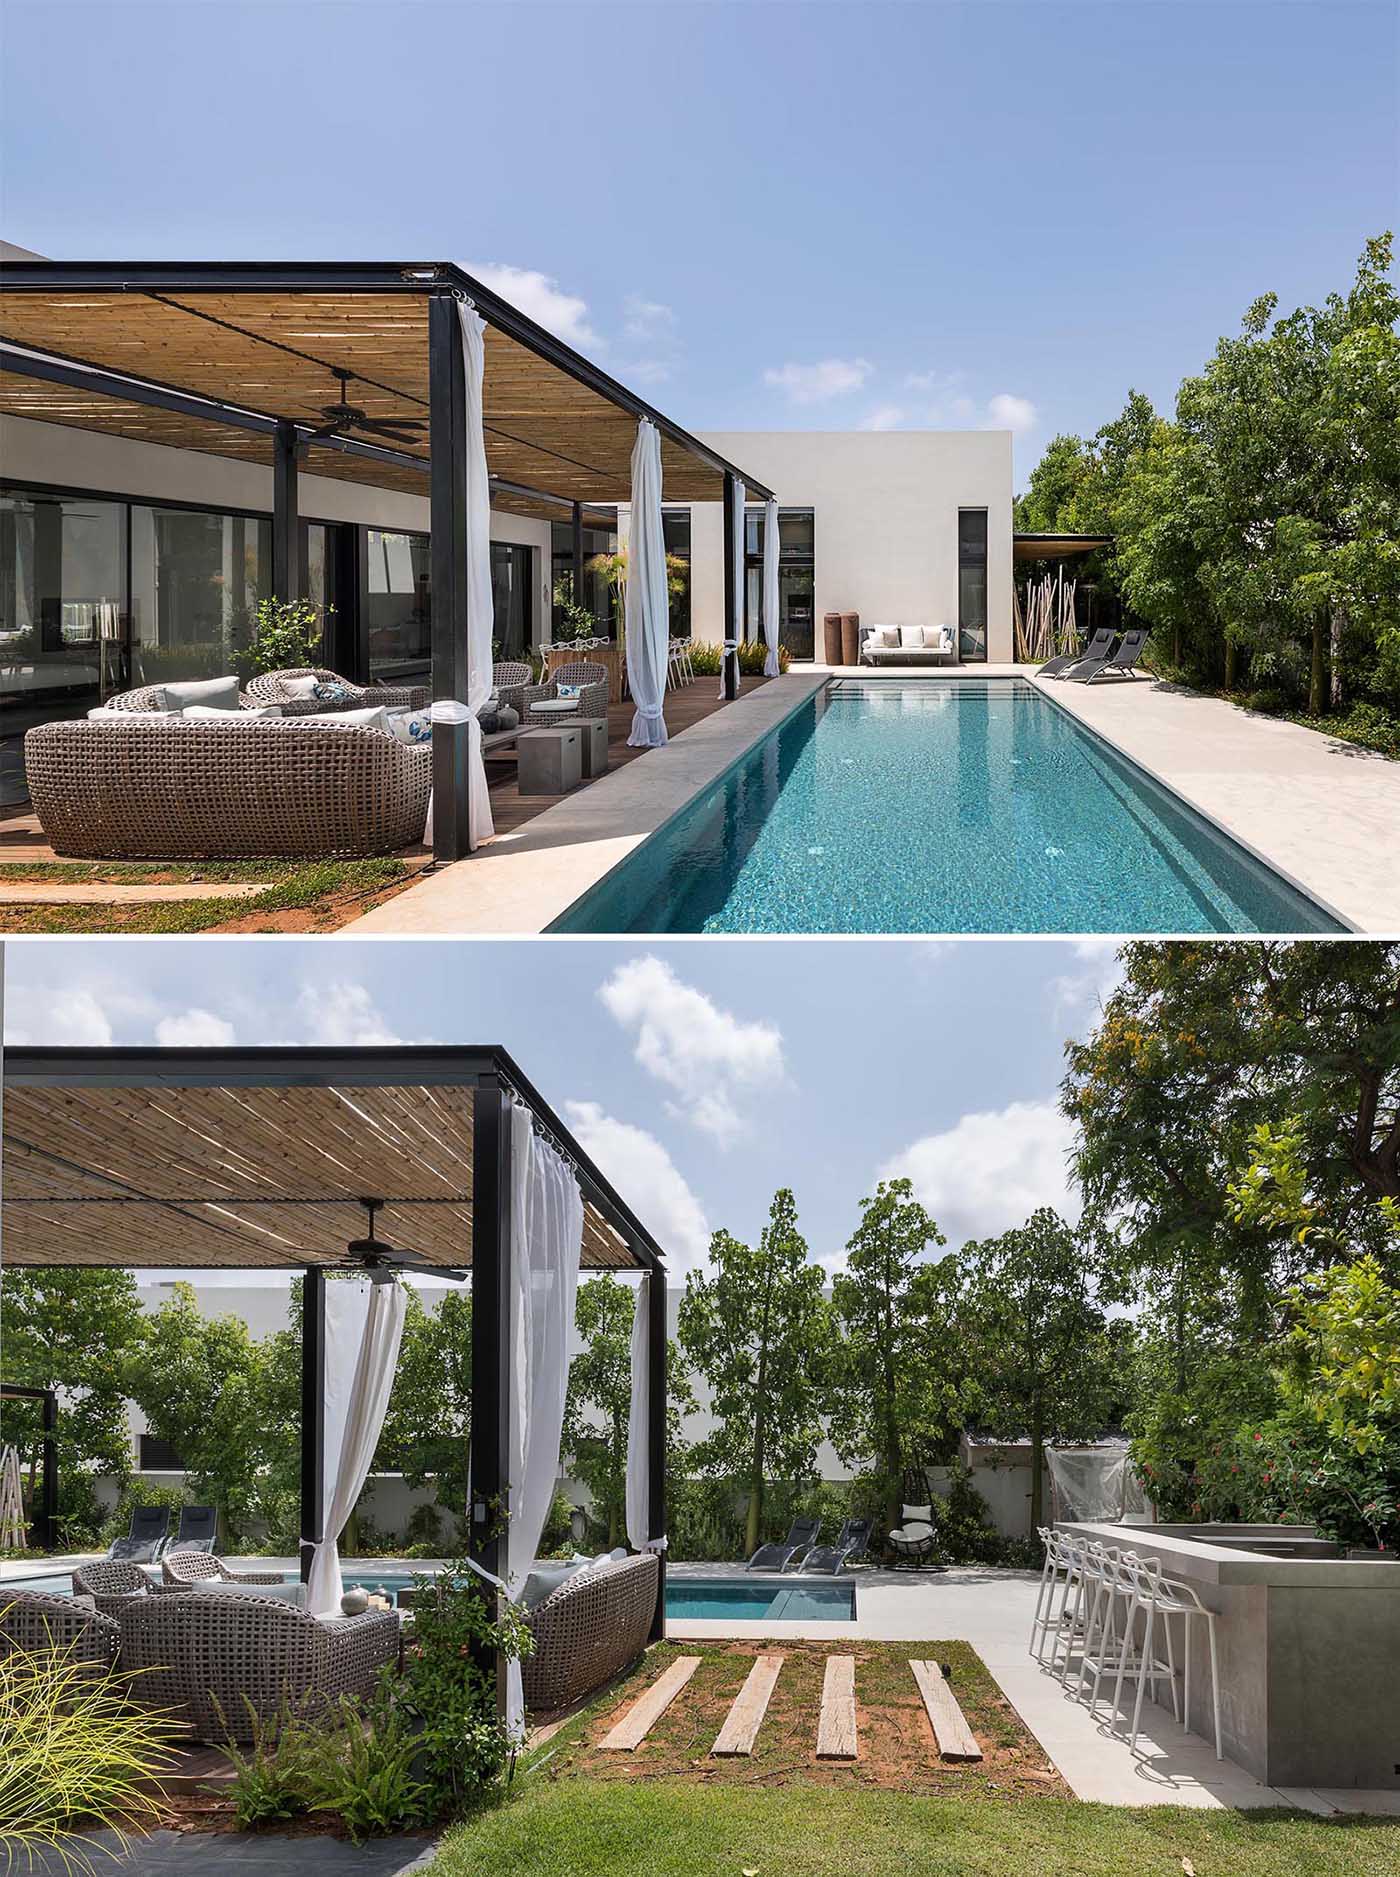 A modern house with a swimming pool and a bamboo pergola that shades a pathway and an outdoor living and dining area.